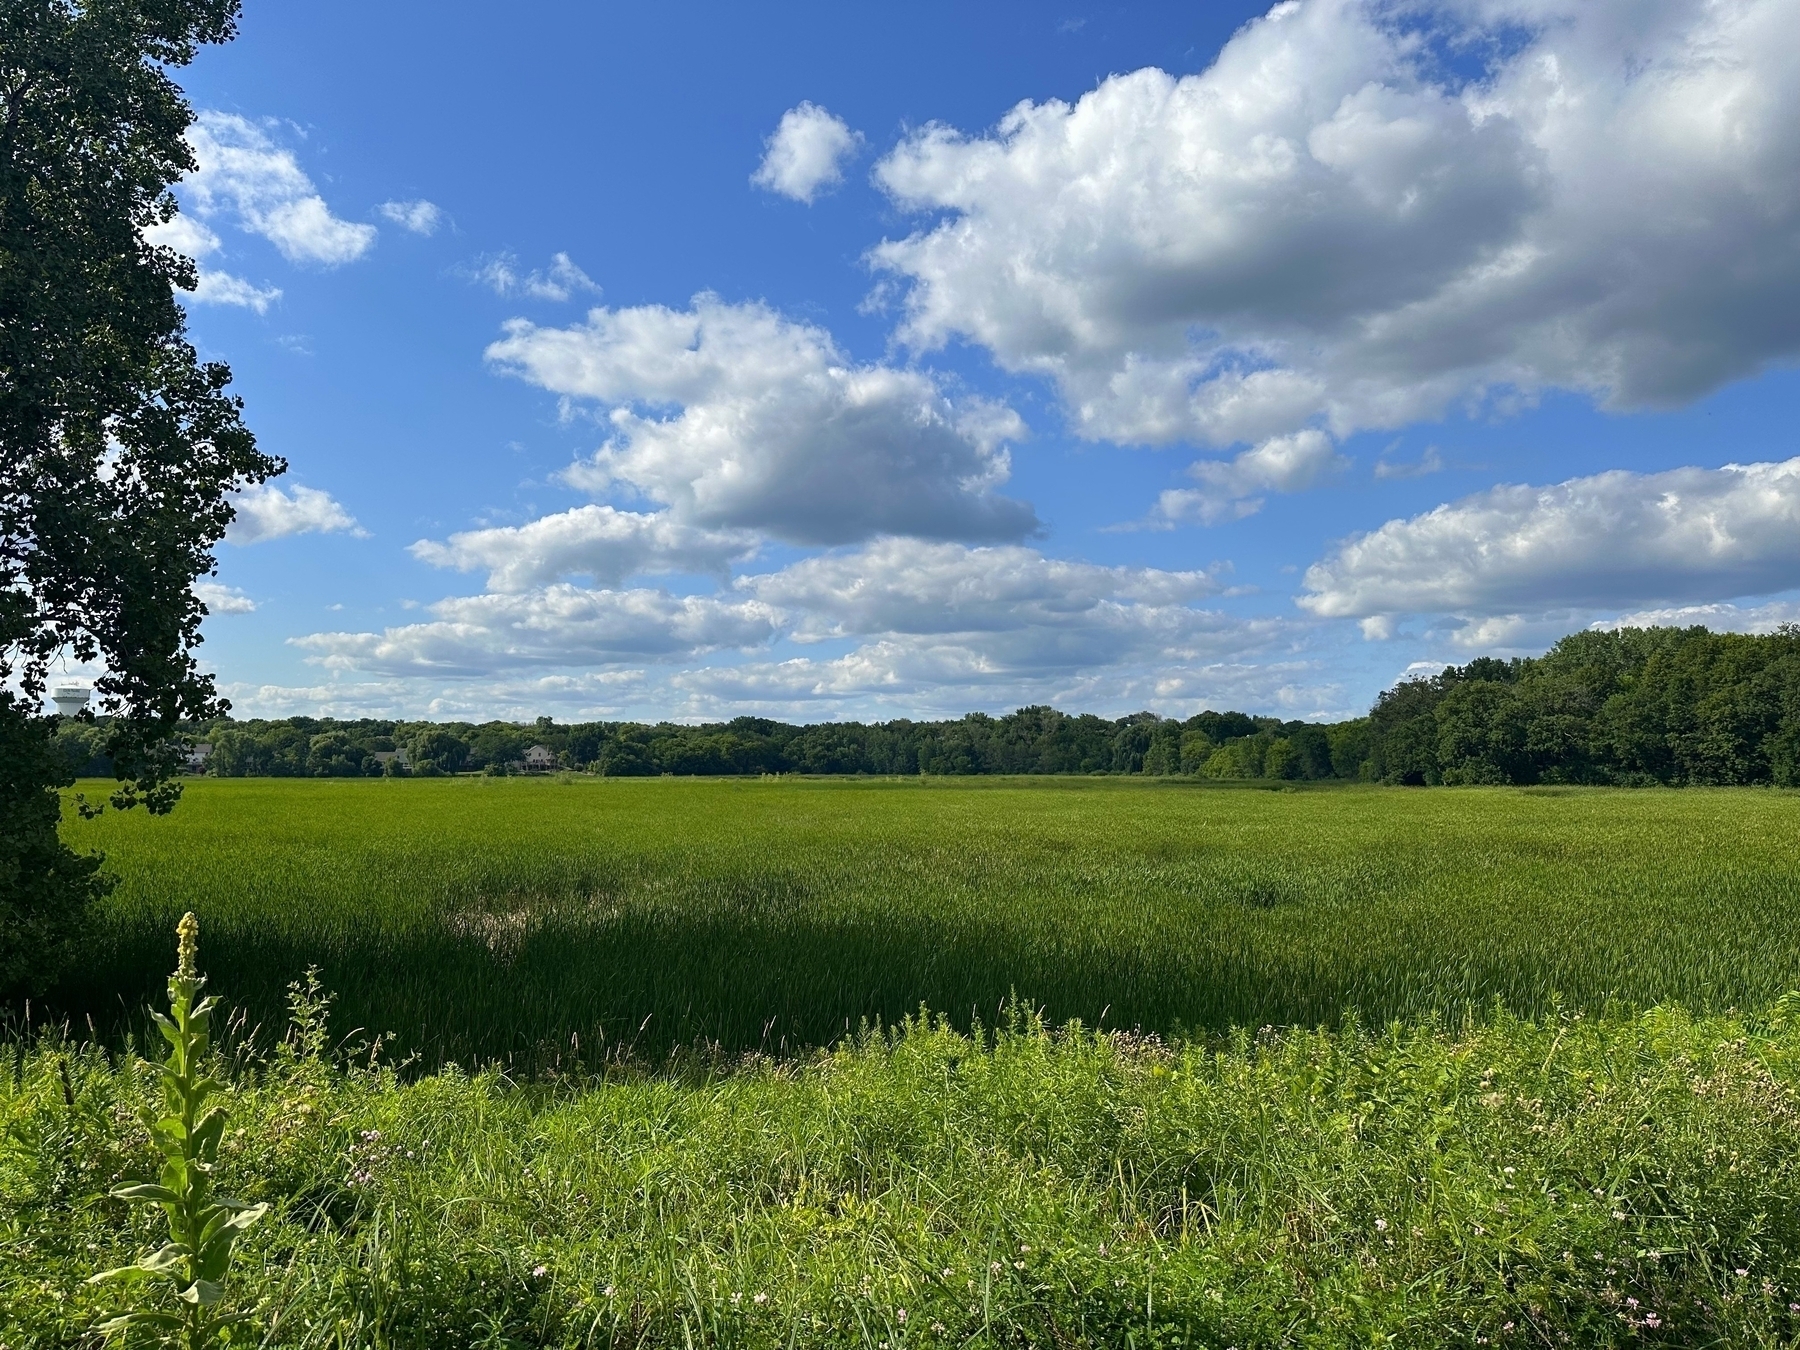 A vast green field stretches under a bright blue sky dotted with fluffy clouds, bordered by a line of dense green trees. A single tall plant stands in the foreground.